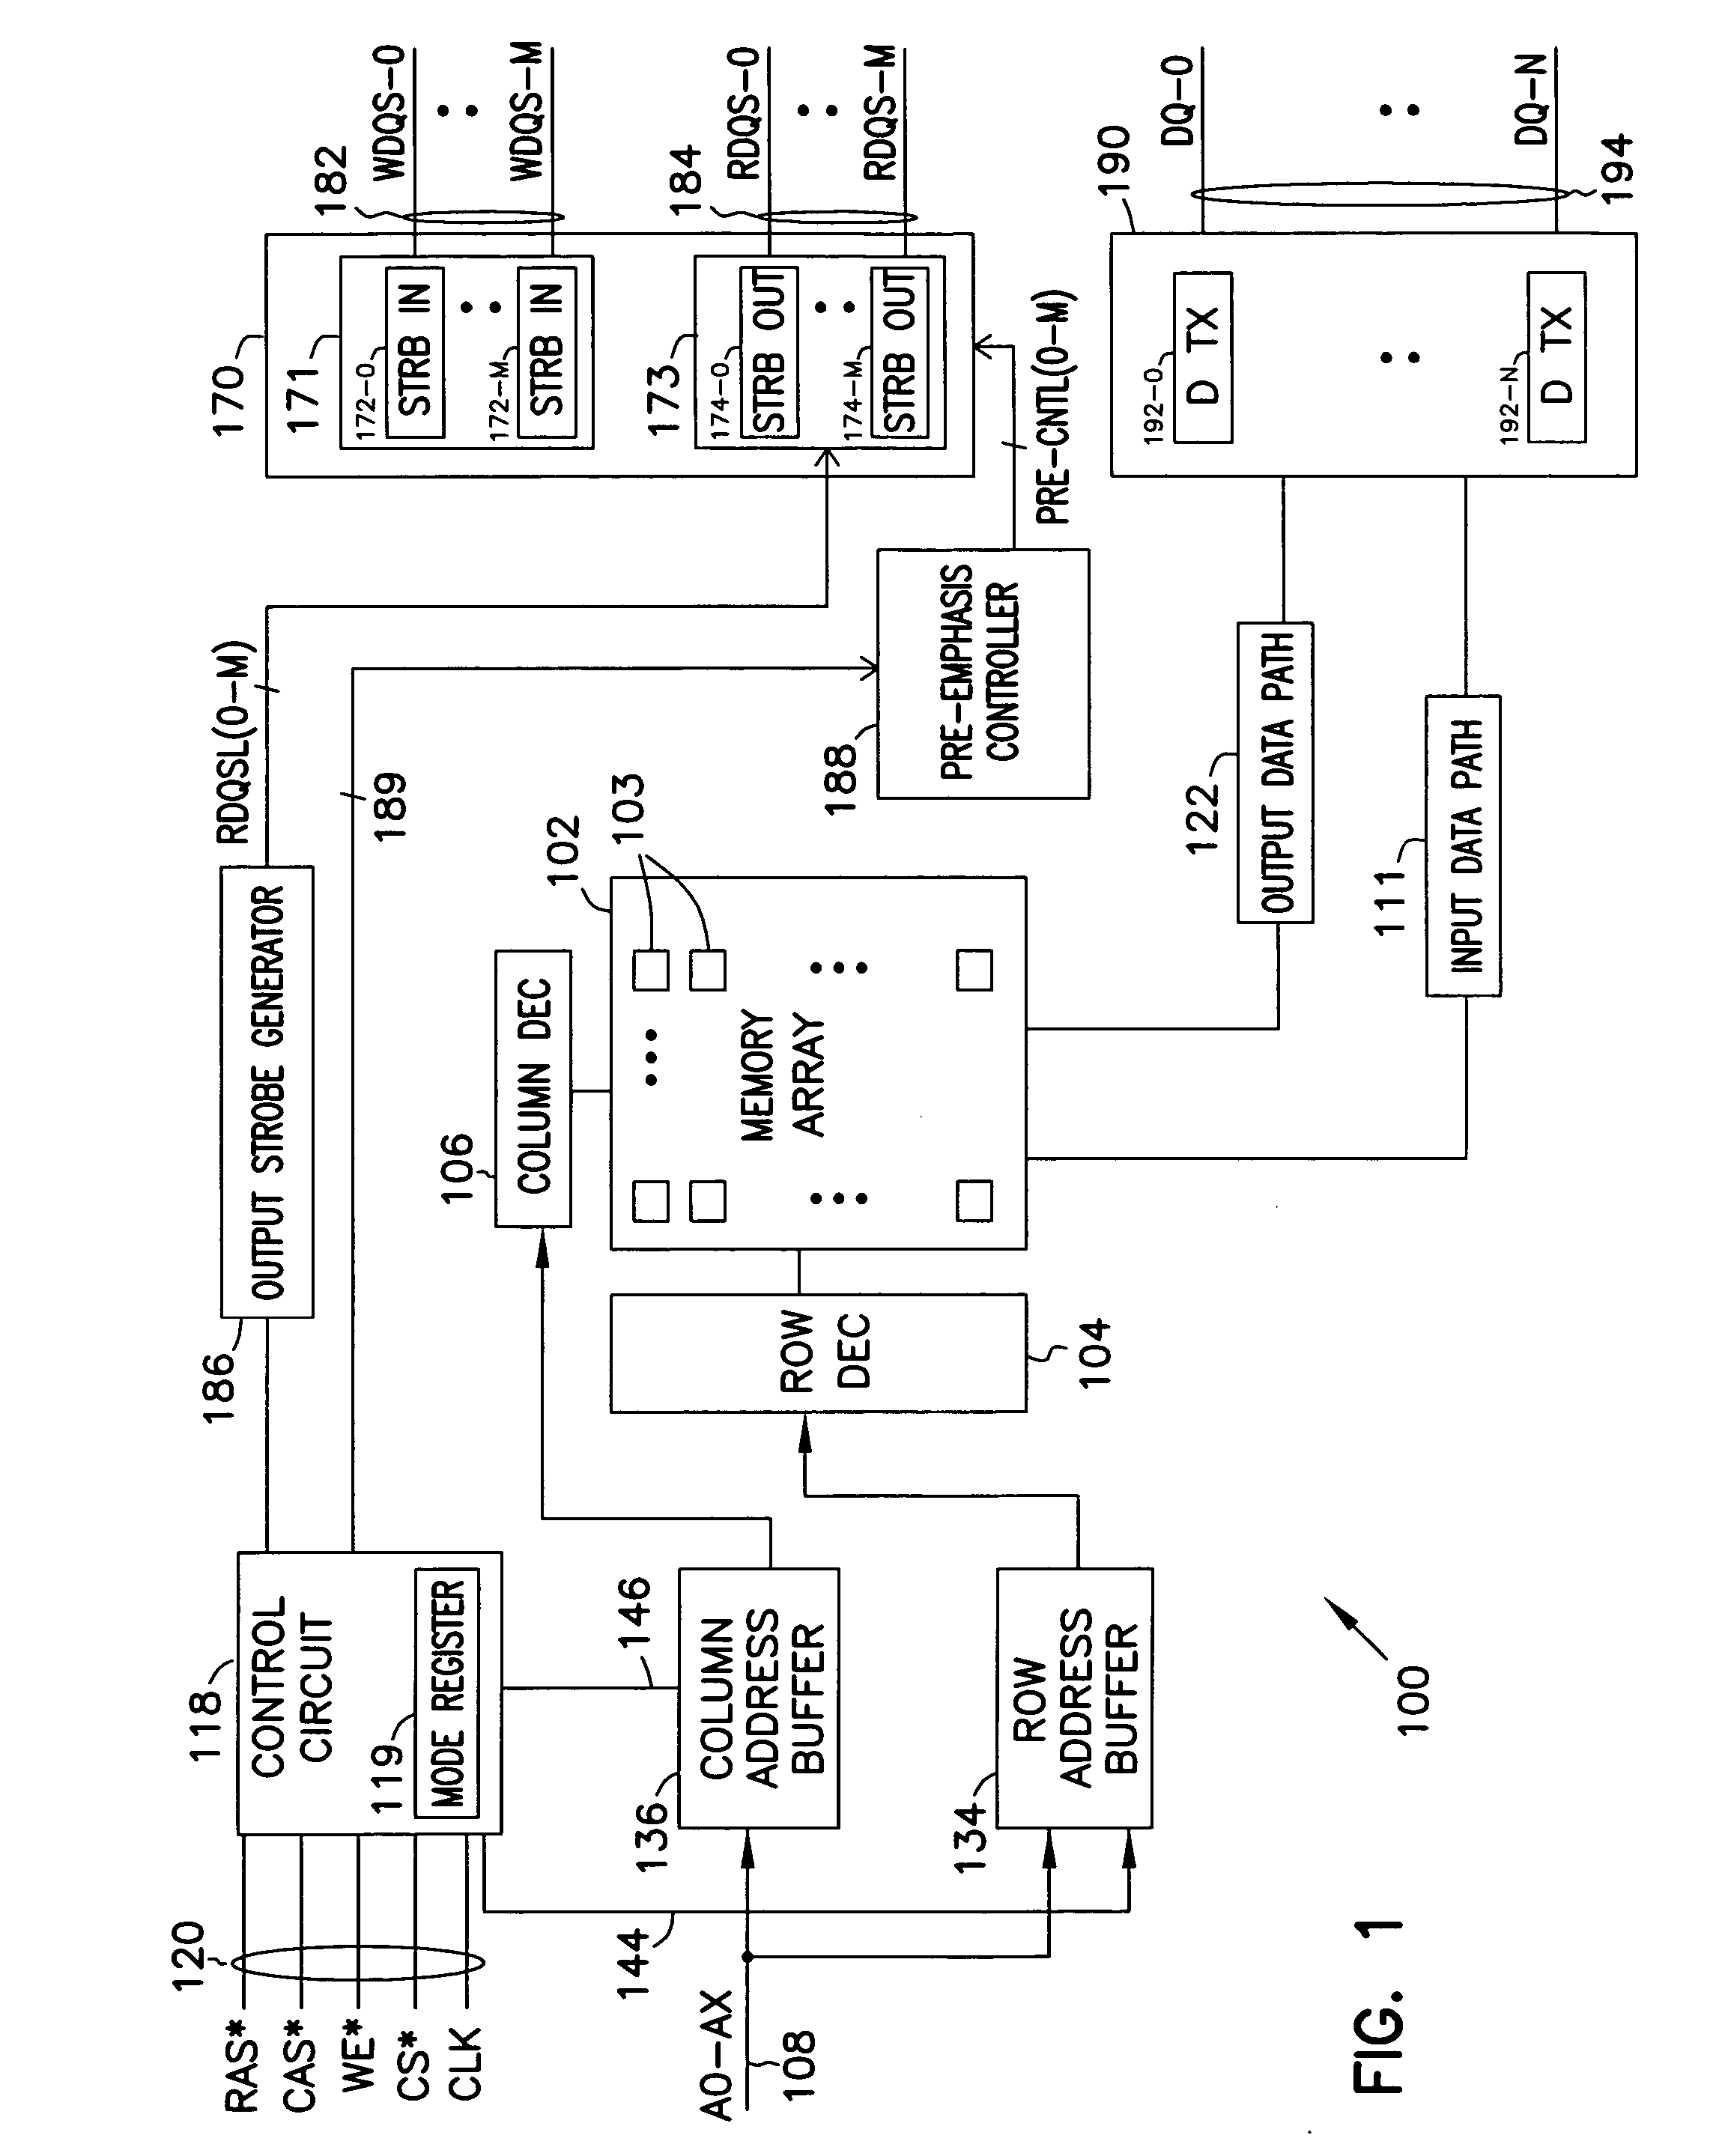 Pre-emphasis for strobe signals in memory device